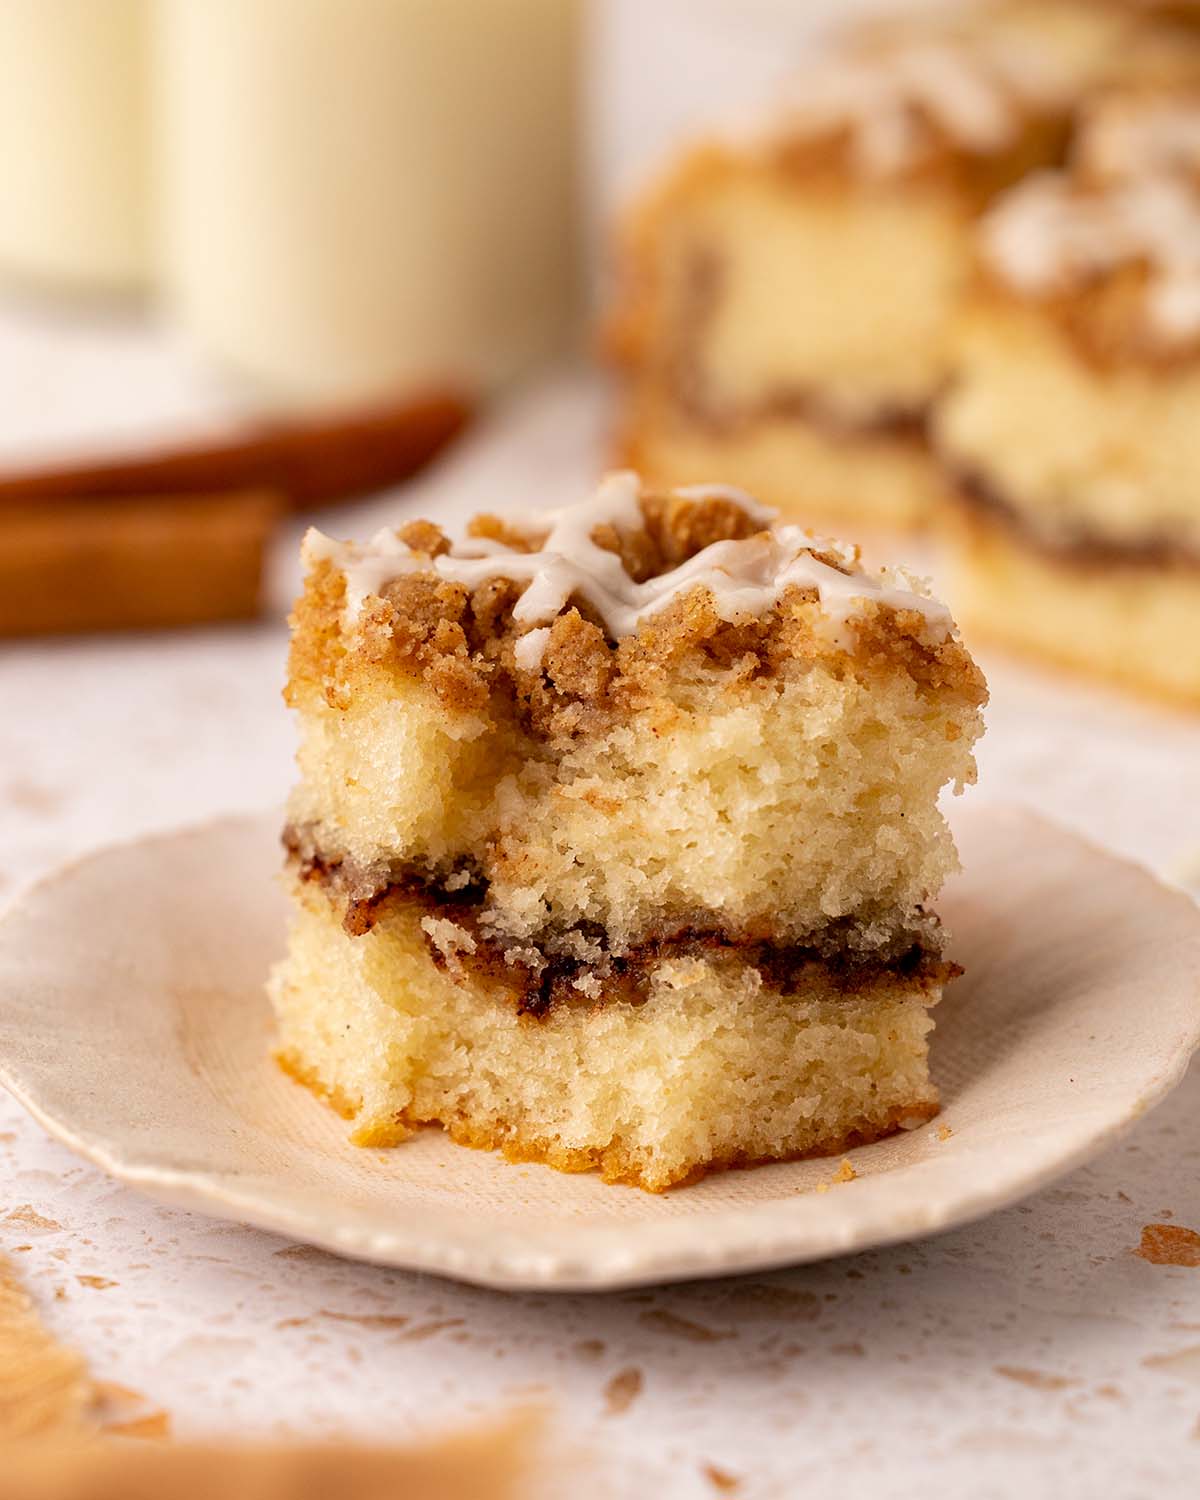 Close up of a slice of coffee cake that has a bite taken out of it. The cake has a light golden sponge, thick layer of cinnamon sugar and crumb topping.